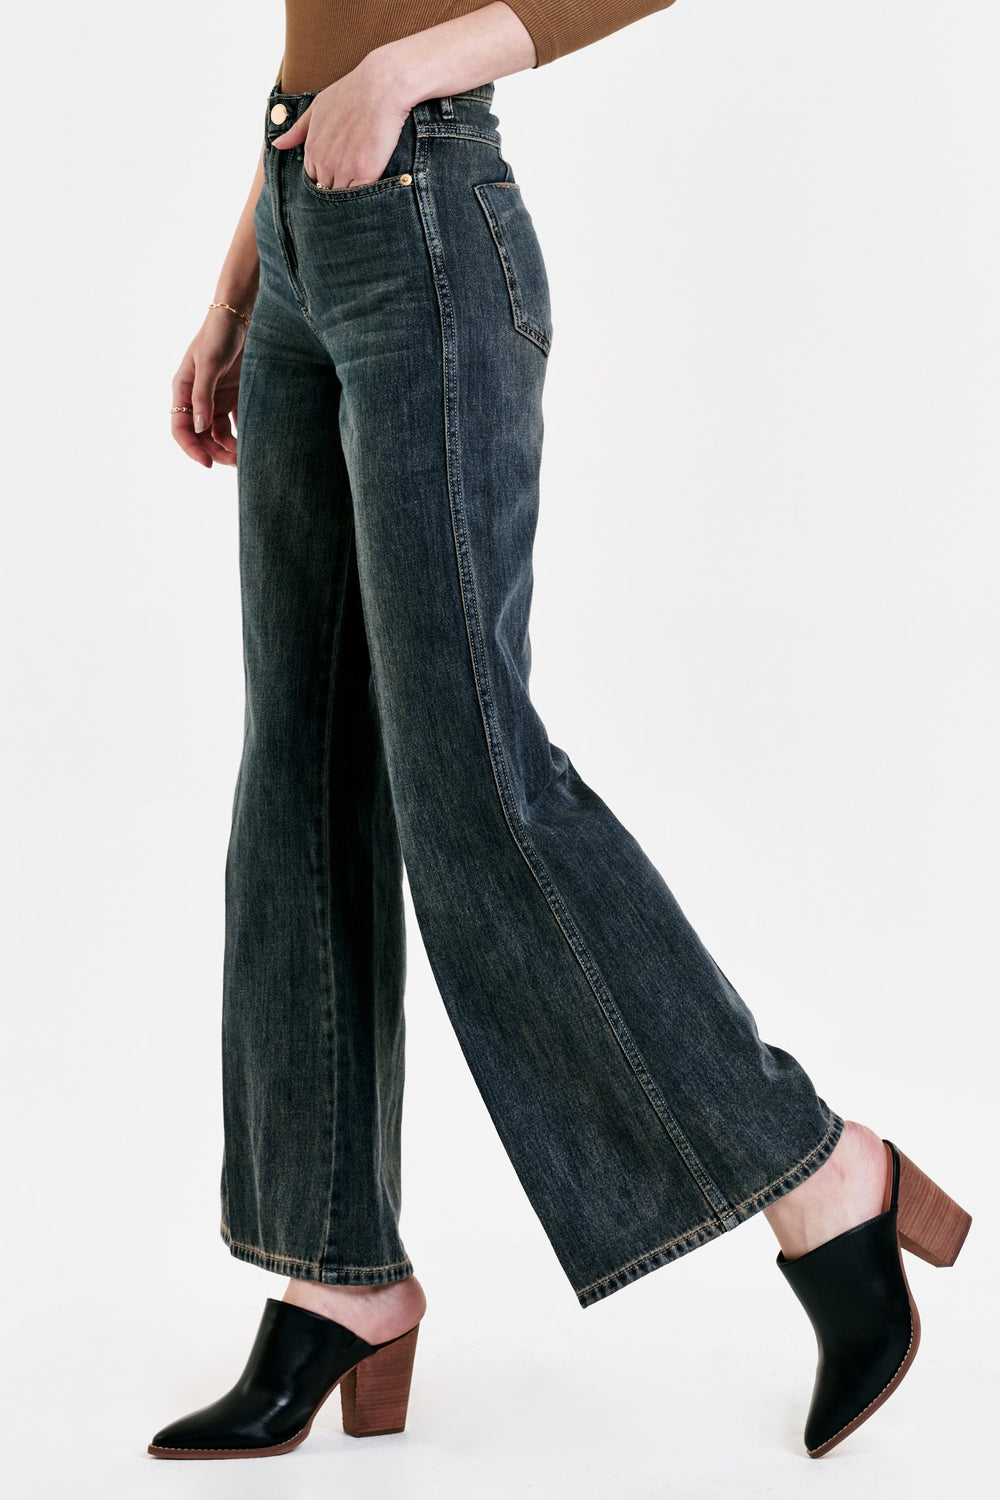 image of a female model wearing a FIONA SUPER HIGH RISE WIDE LEG JEANS BORDEOUX JEANS